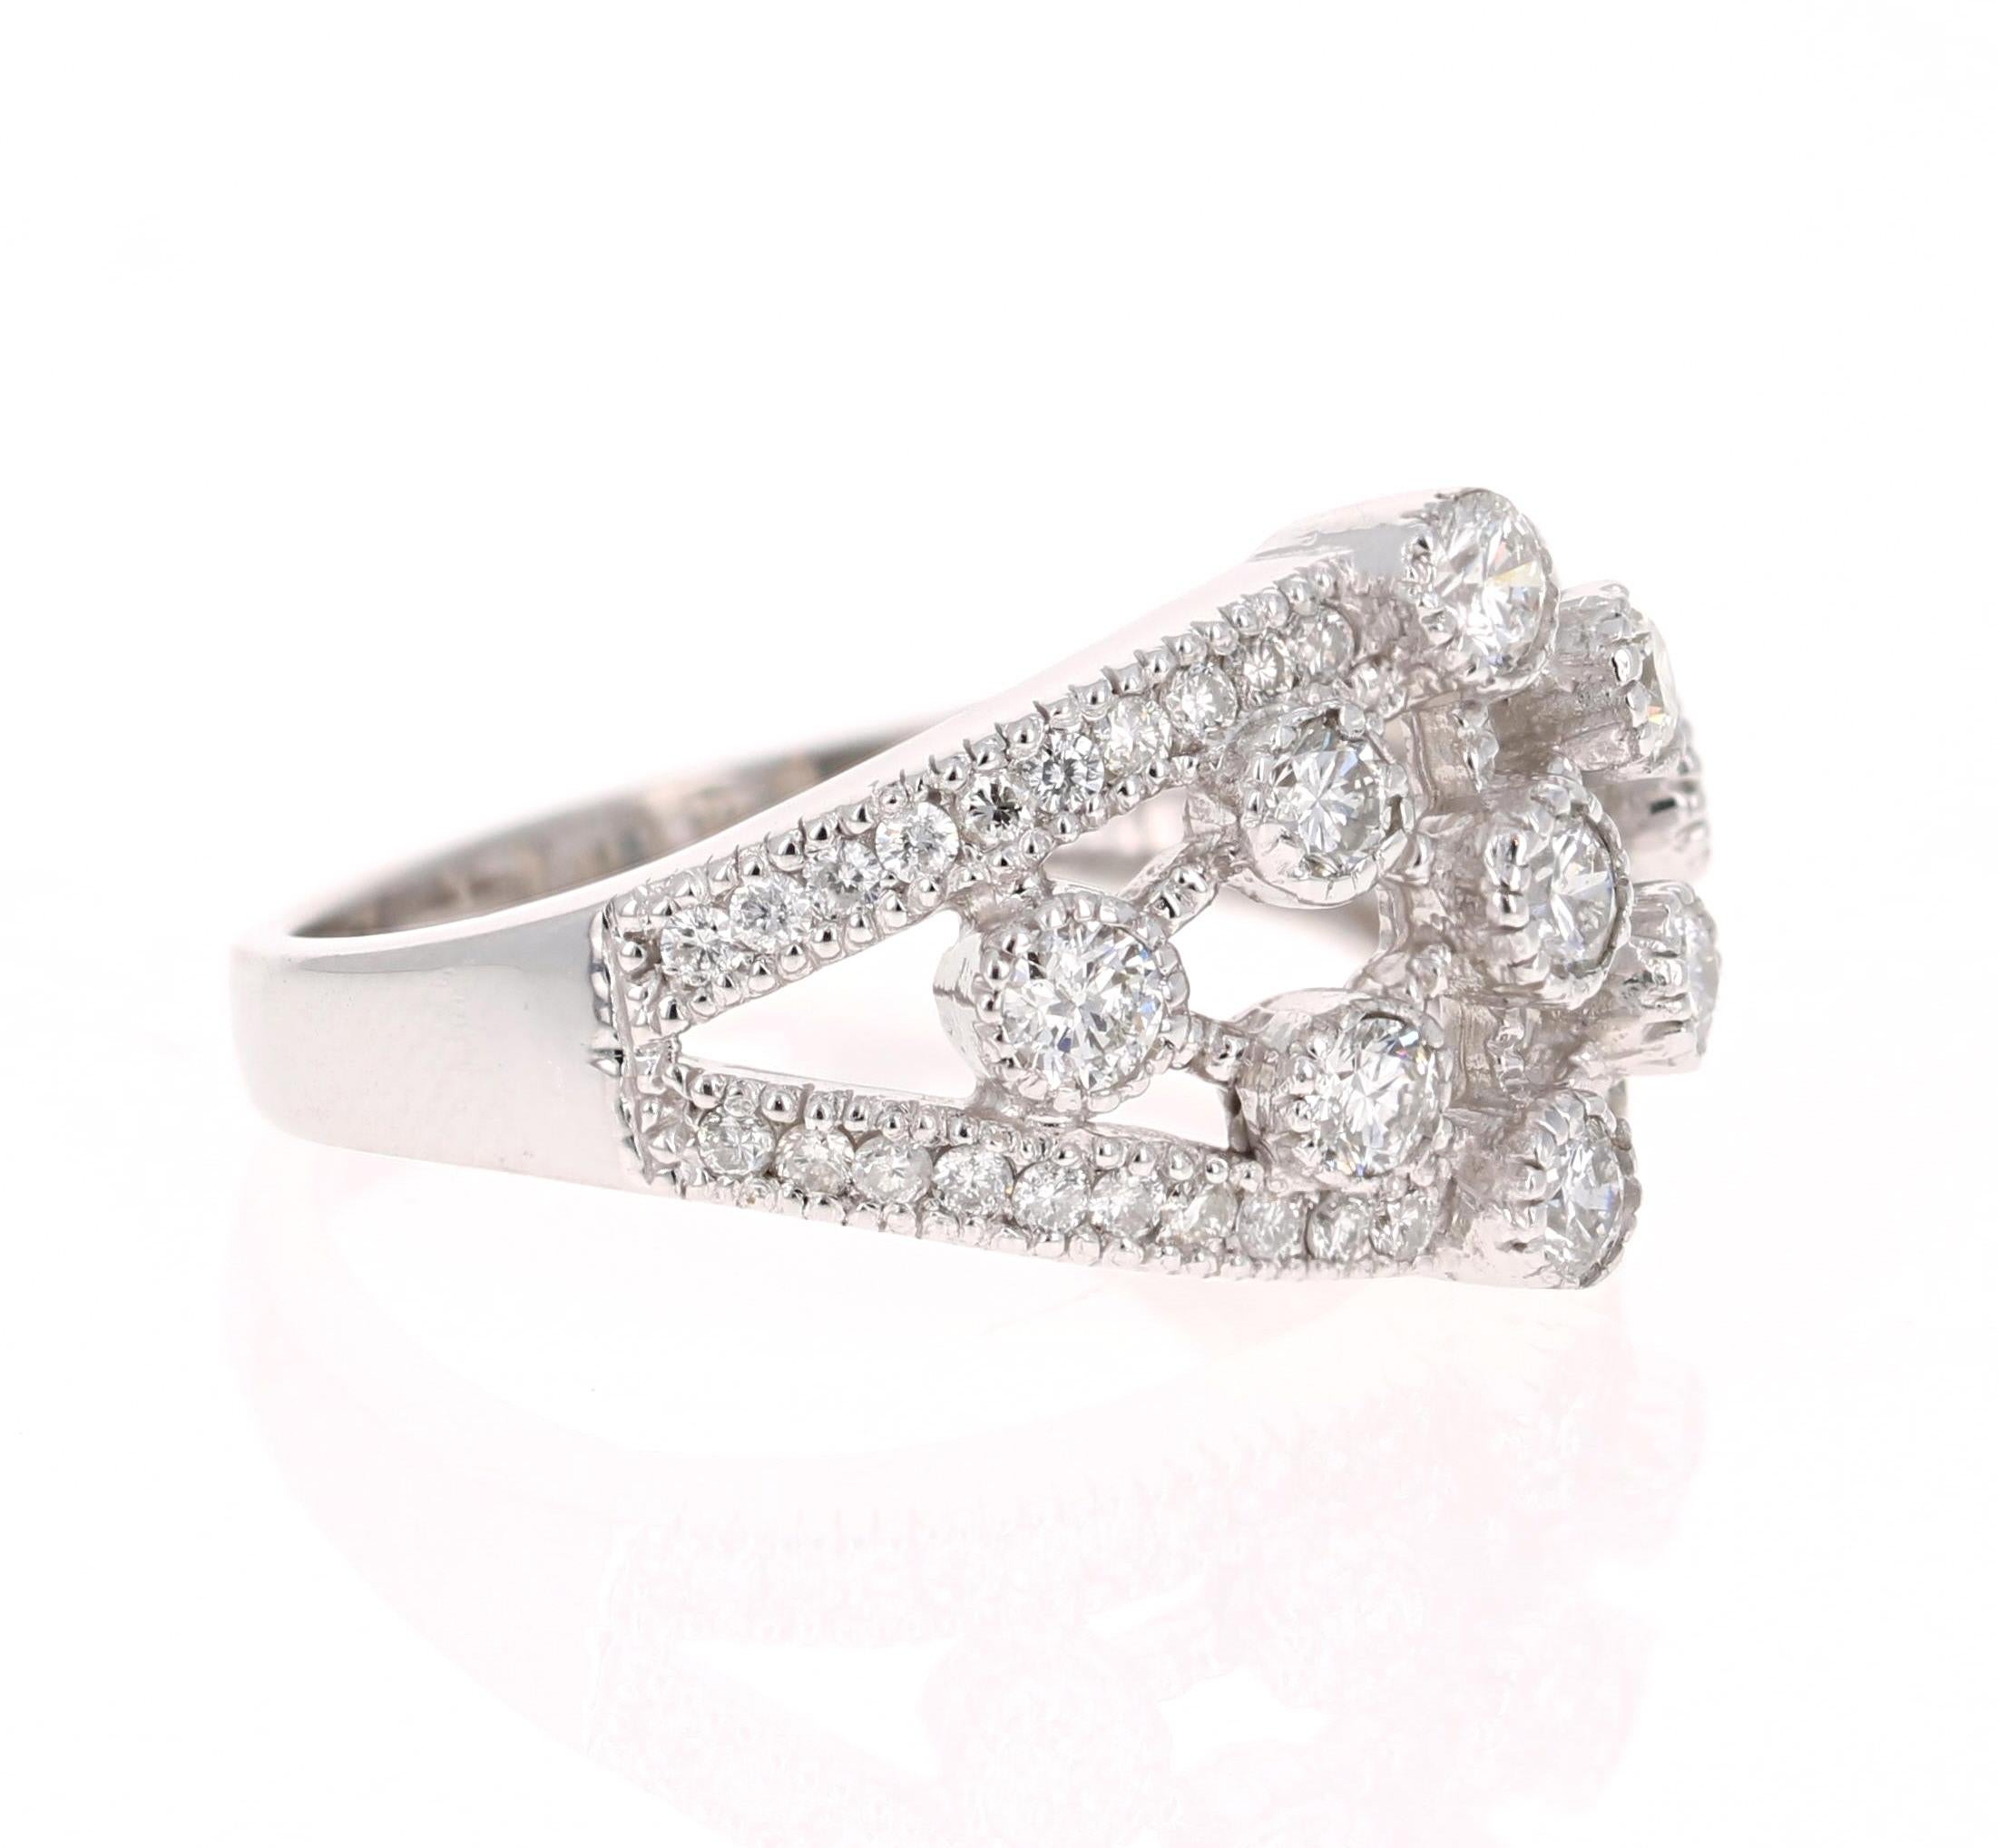 A simple cocktail/statement band. It has 49 Round Cut Diamonds that weigh 0.91 Carats. (Clarity: SI, Color: F)
Very much on trend with the modern day rings. A ring that screams #girlpower #bossbabe #bosslady for the independent and strong! 
Great as